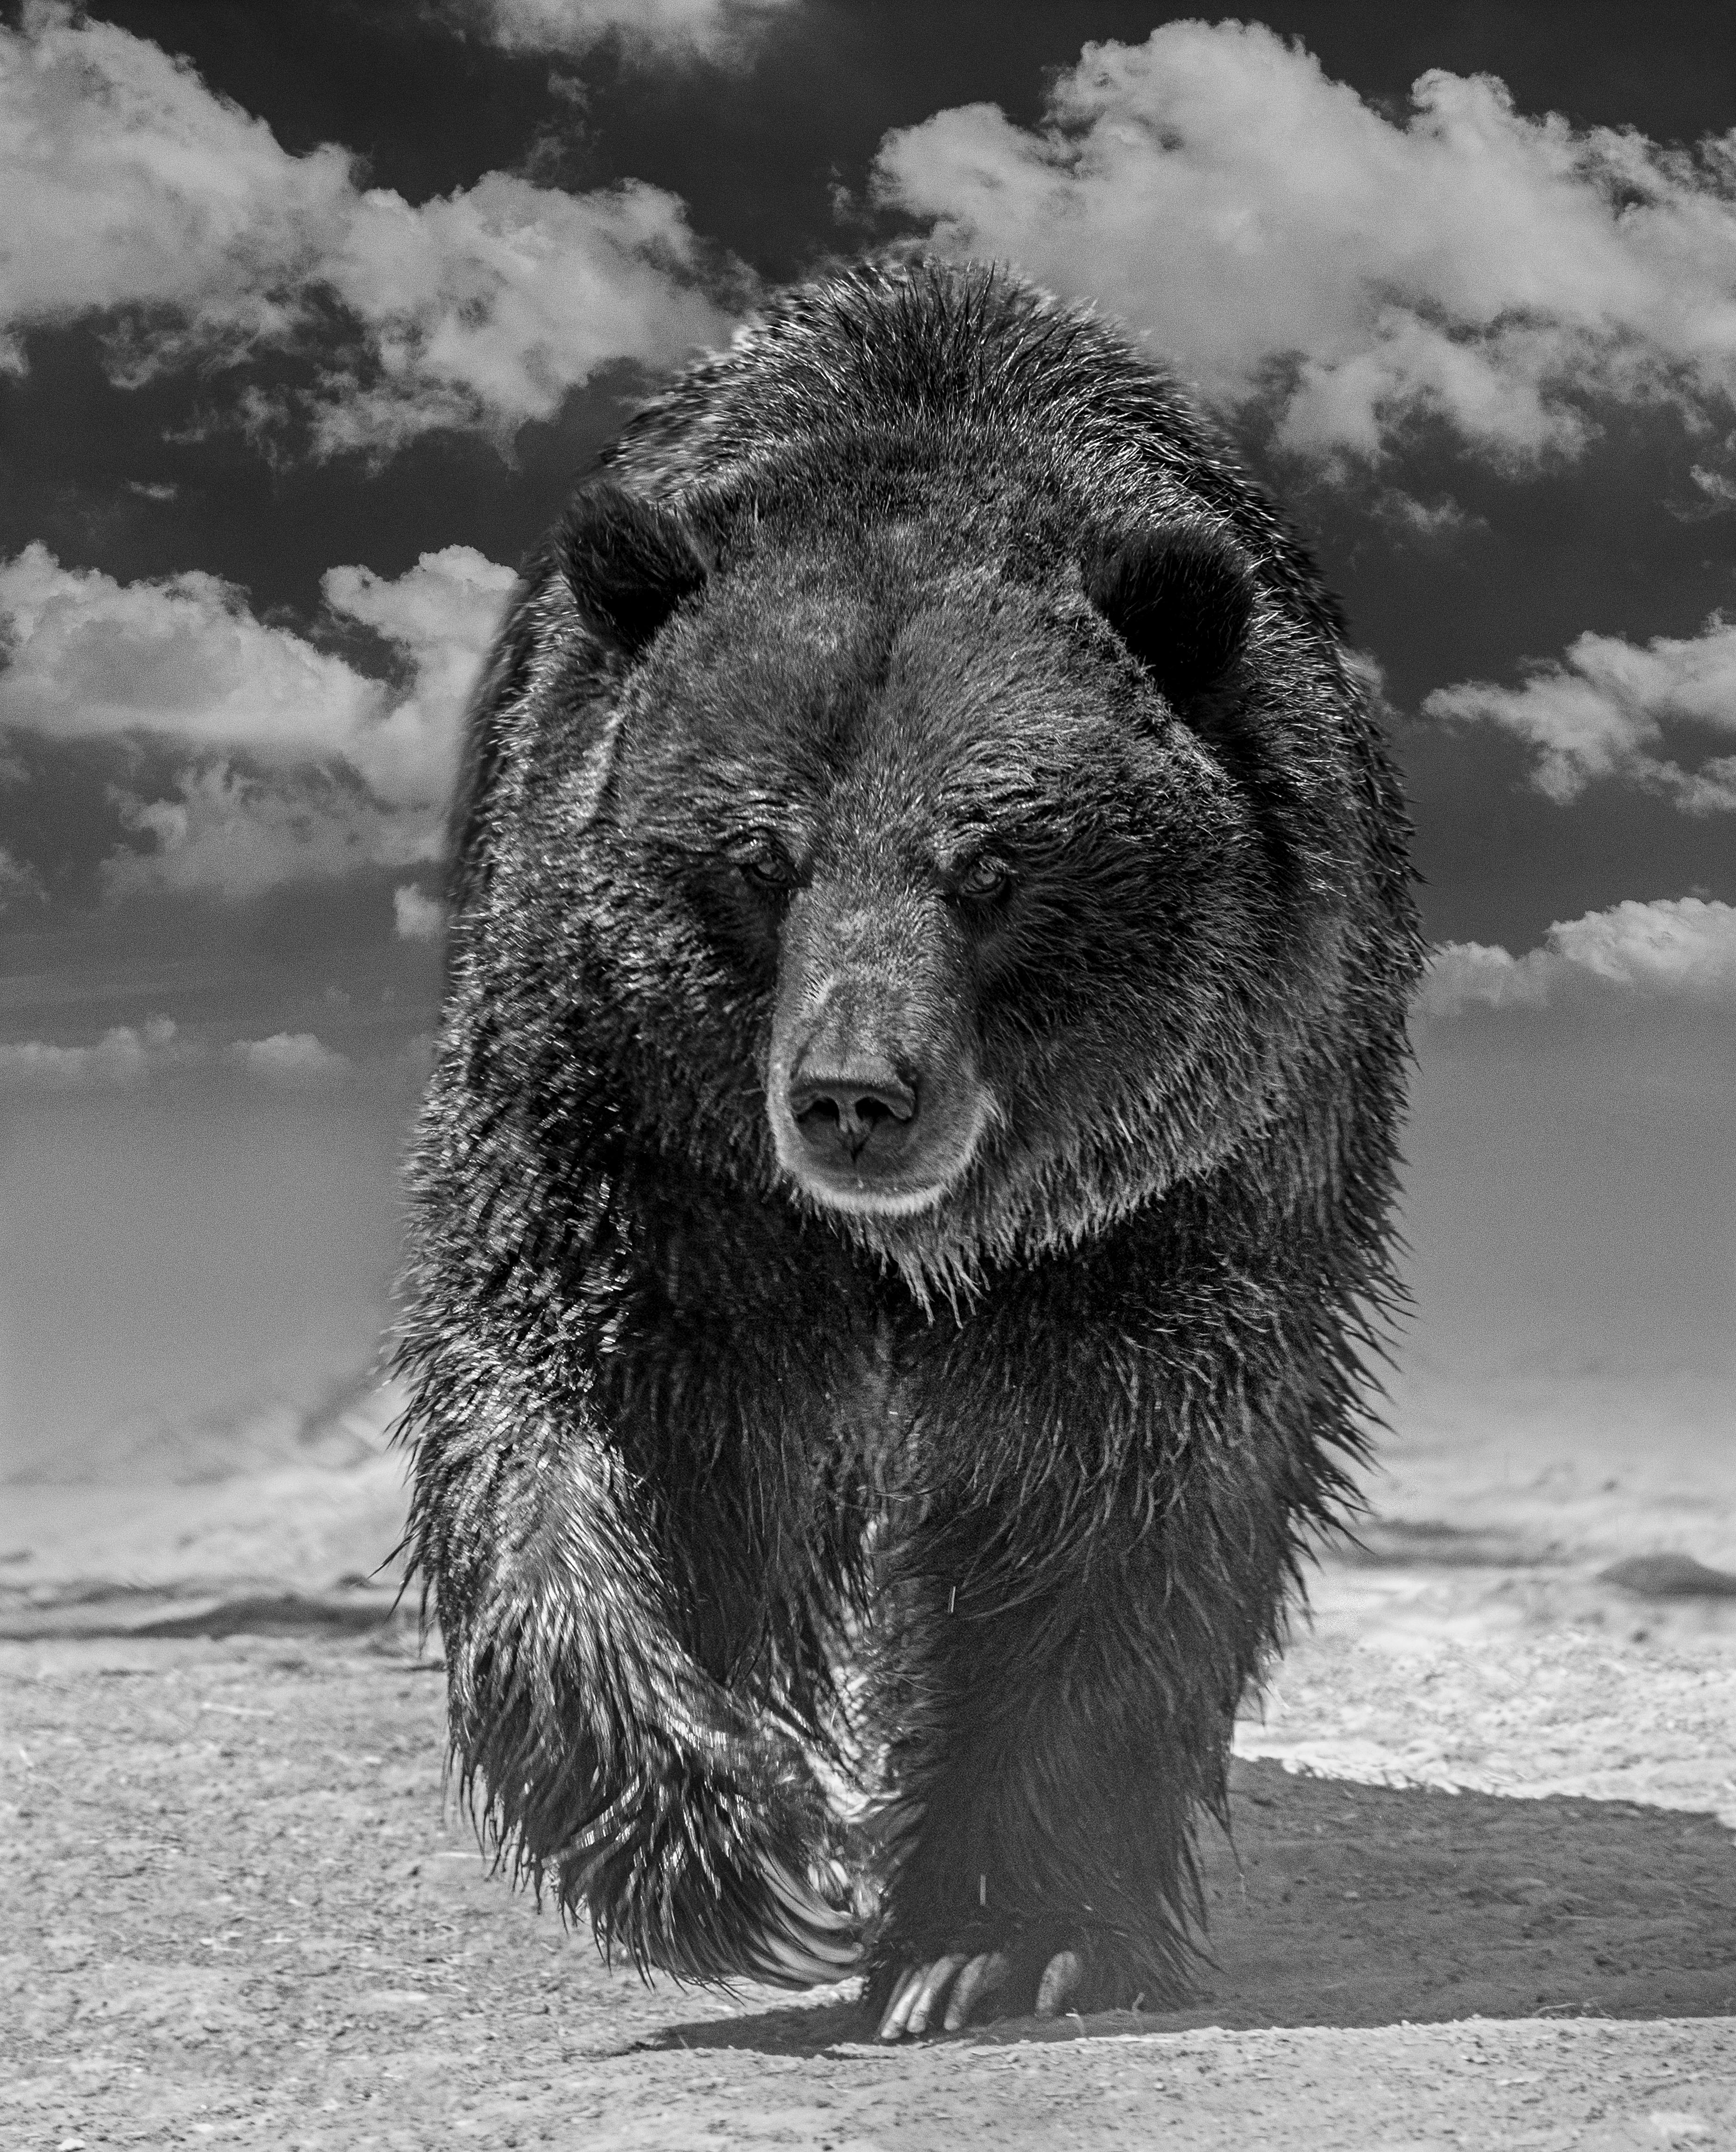 Shane Russeck Black and White Photograph - Grizzly Shores 36x48 Black & White Photography Grizzly Bear Photograph Fine Art